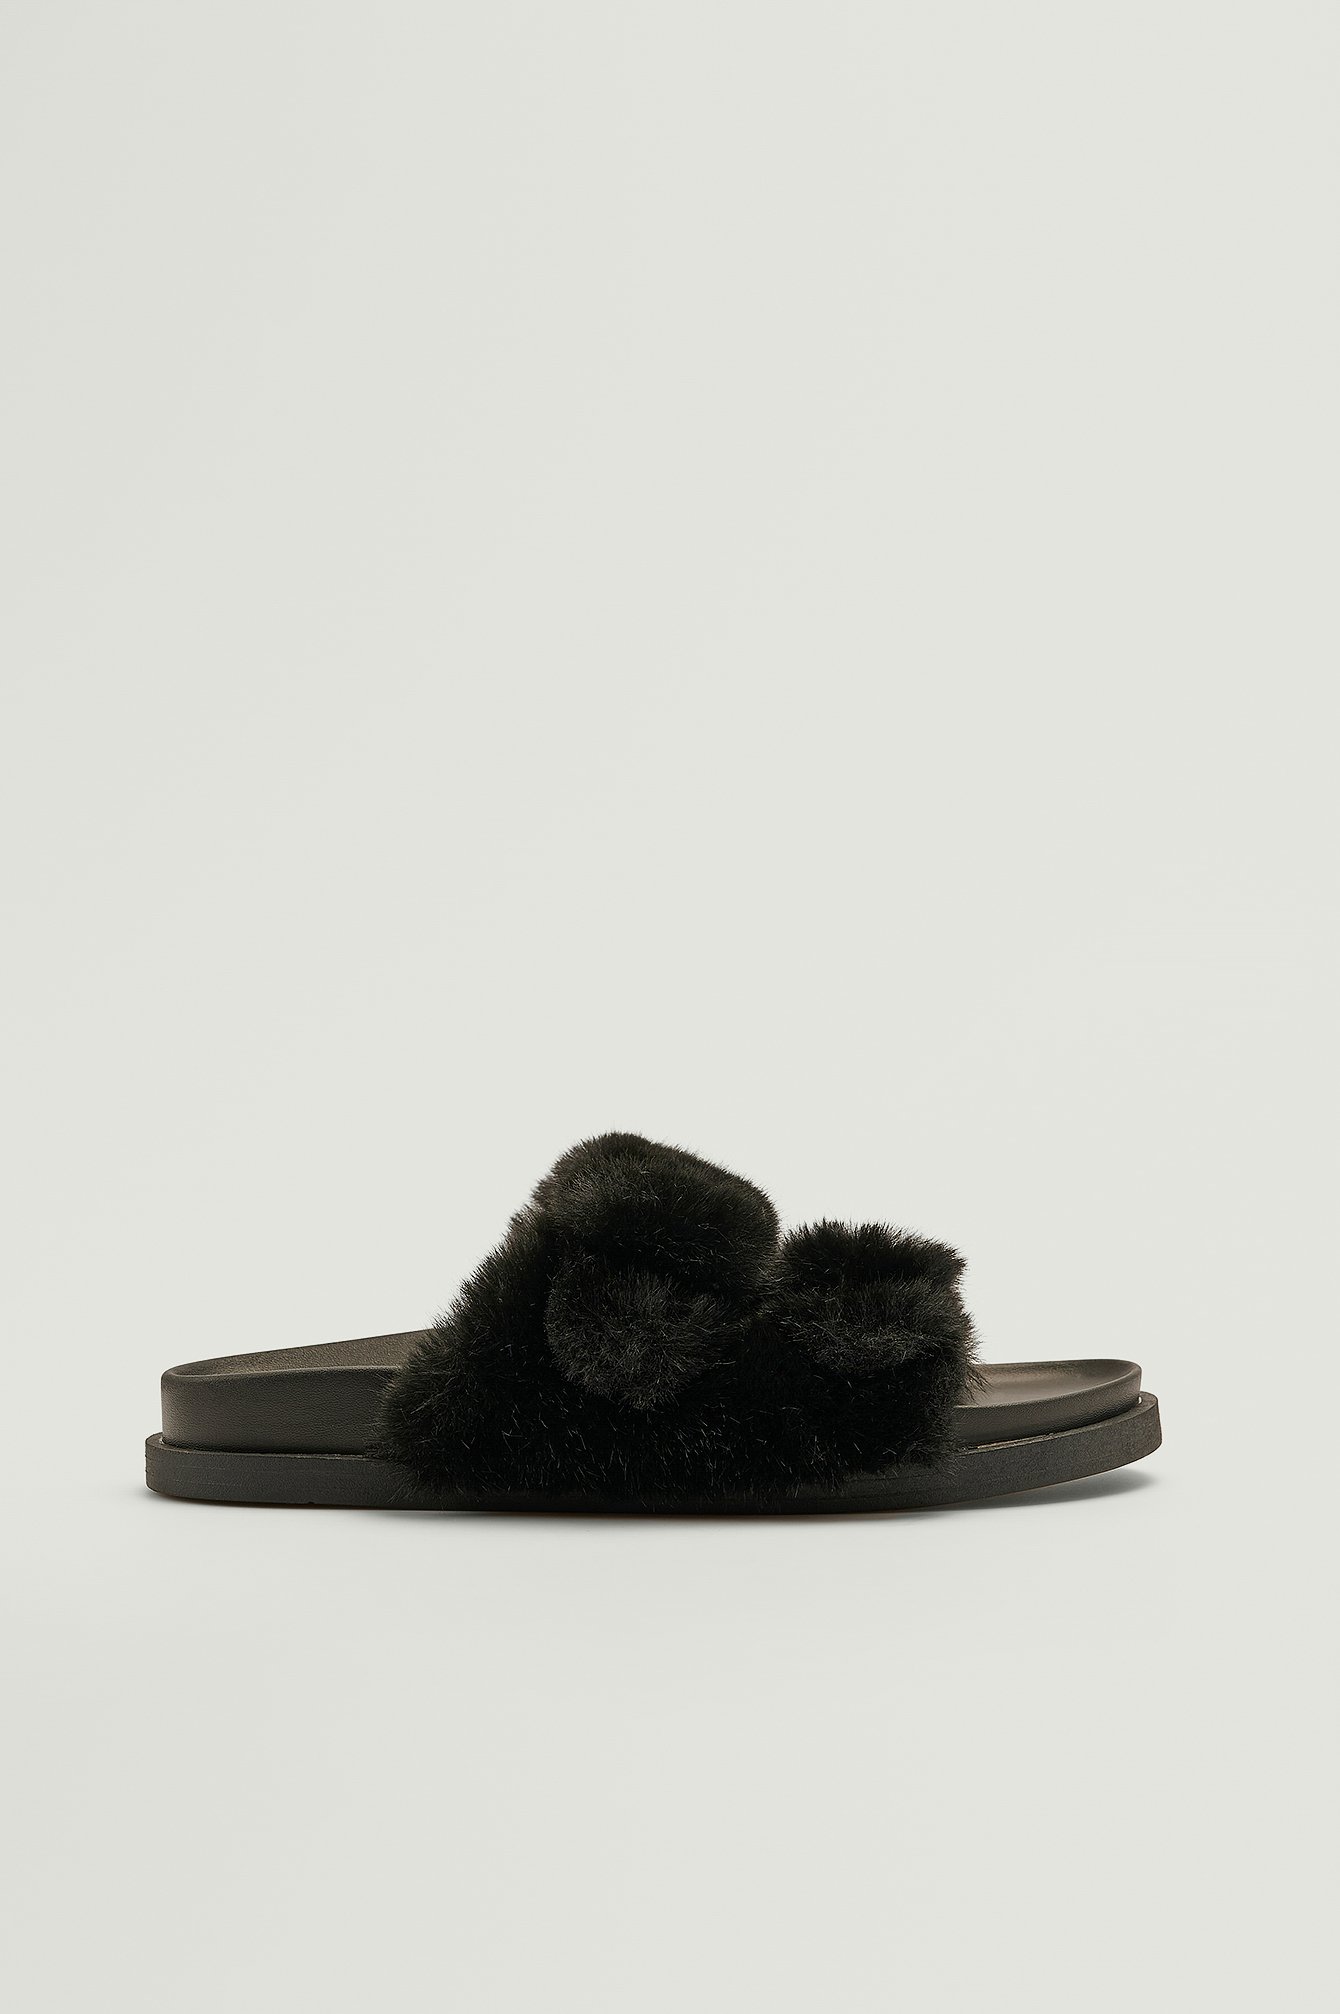 RelyOme Womens Furry Slides Fuzzy Slippers Arch Support Fluffy Flip Flops  Sandals, Black, 8 price in UAE | Amazon UAE | kanbkam